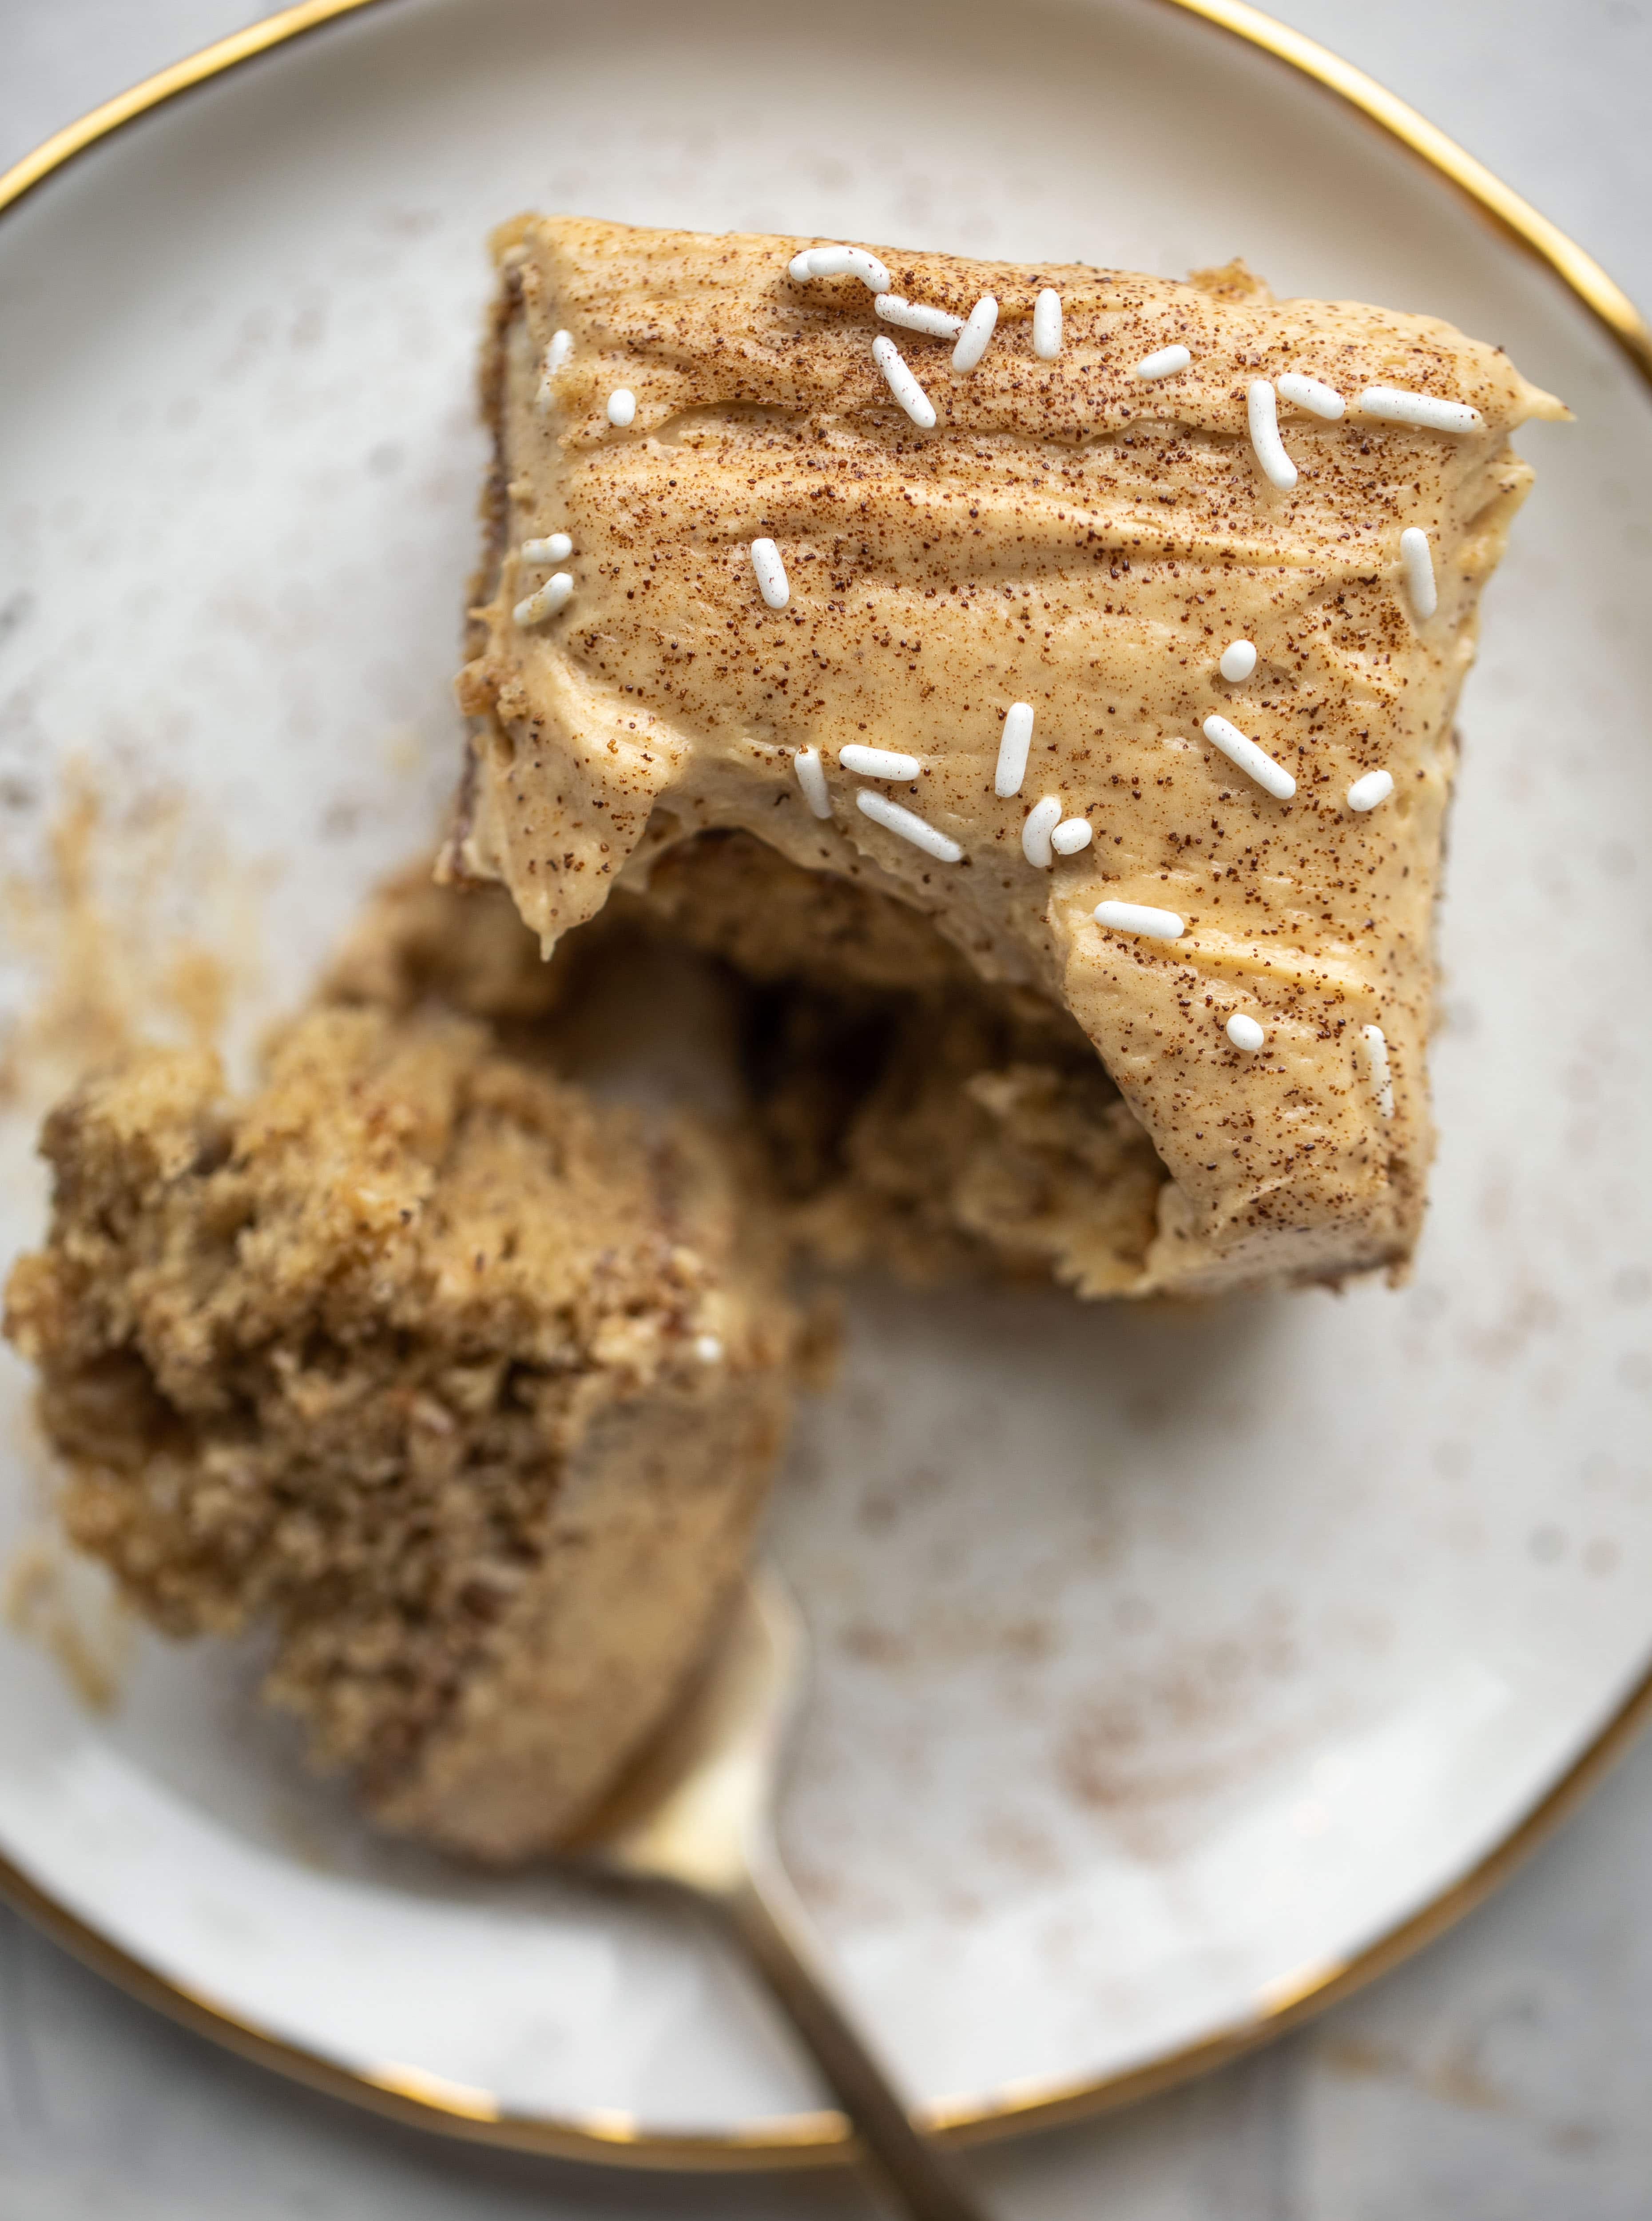 This banana cake is a delicious twist on banana bread! Covered with coffee cream cheese frosting, it’s an easy and wonderful treat.